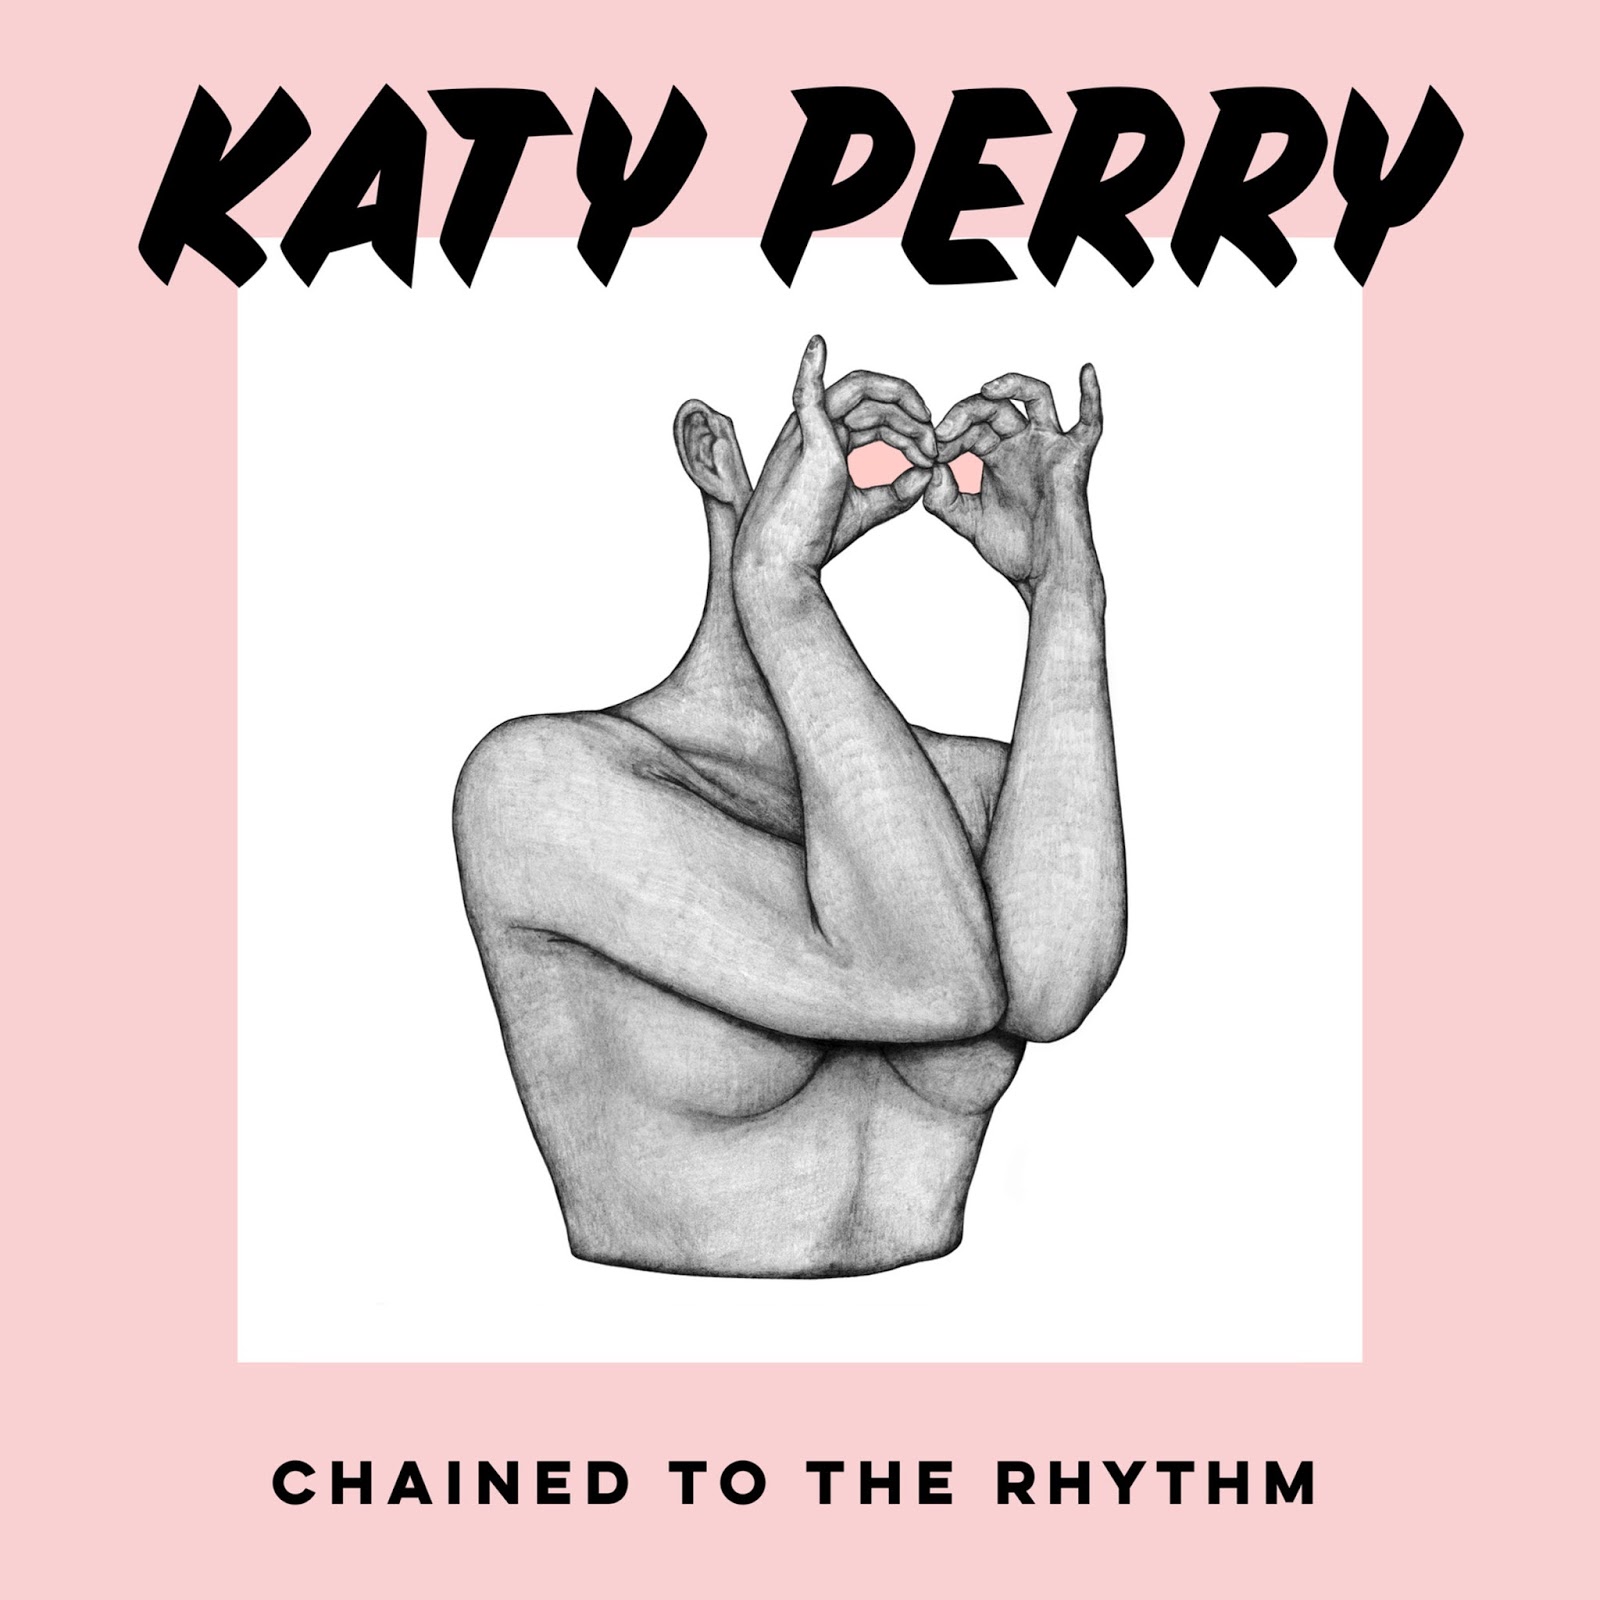 Katy-Perry-Chained-to-the-Rhythm-2017-2480x2480.jpg